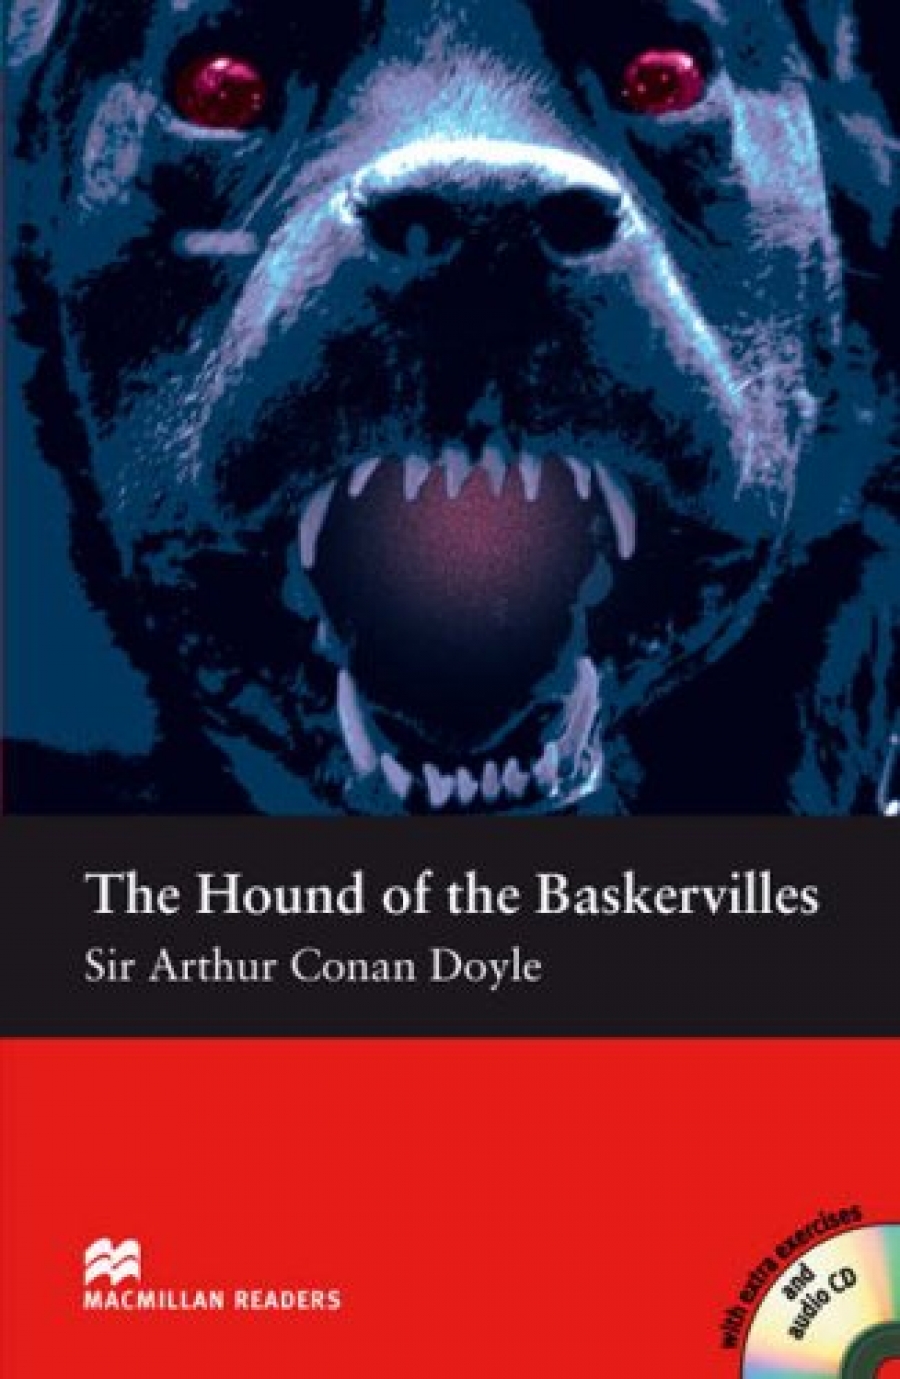 Sir Arthur Conan Doyle, retold by Stephen Colbourn The Hound of the Baskervilles 